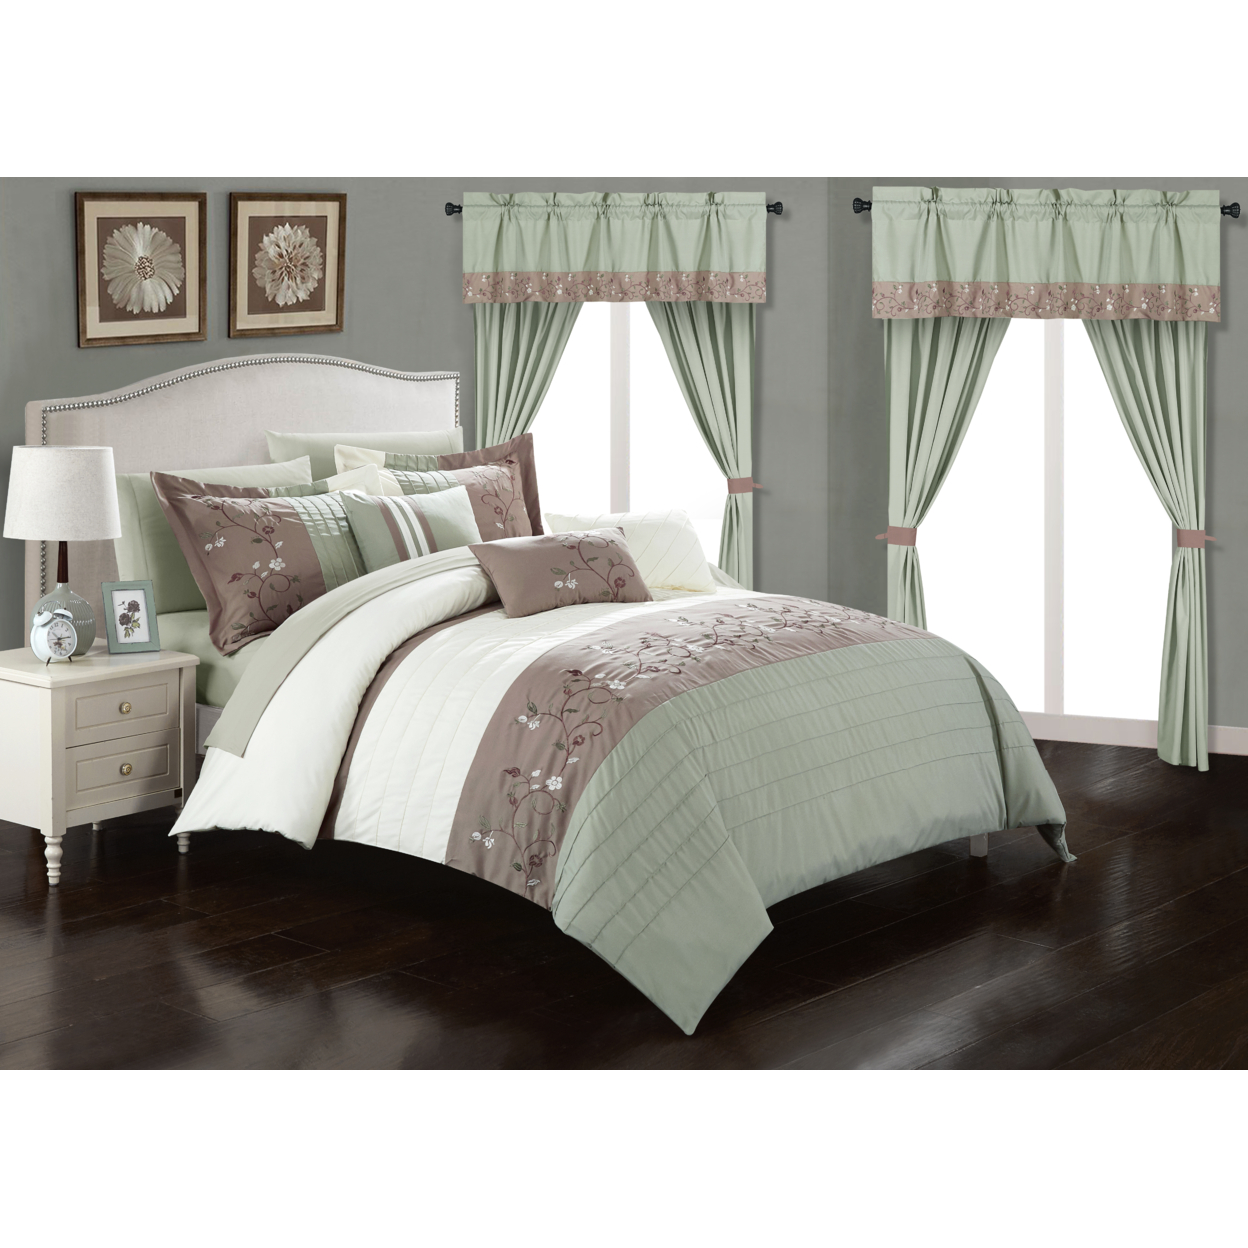 Sonita 20-Piece Bedding Set With Comforter, Sheets & Curtains, Mult. Colors - Green, King